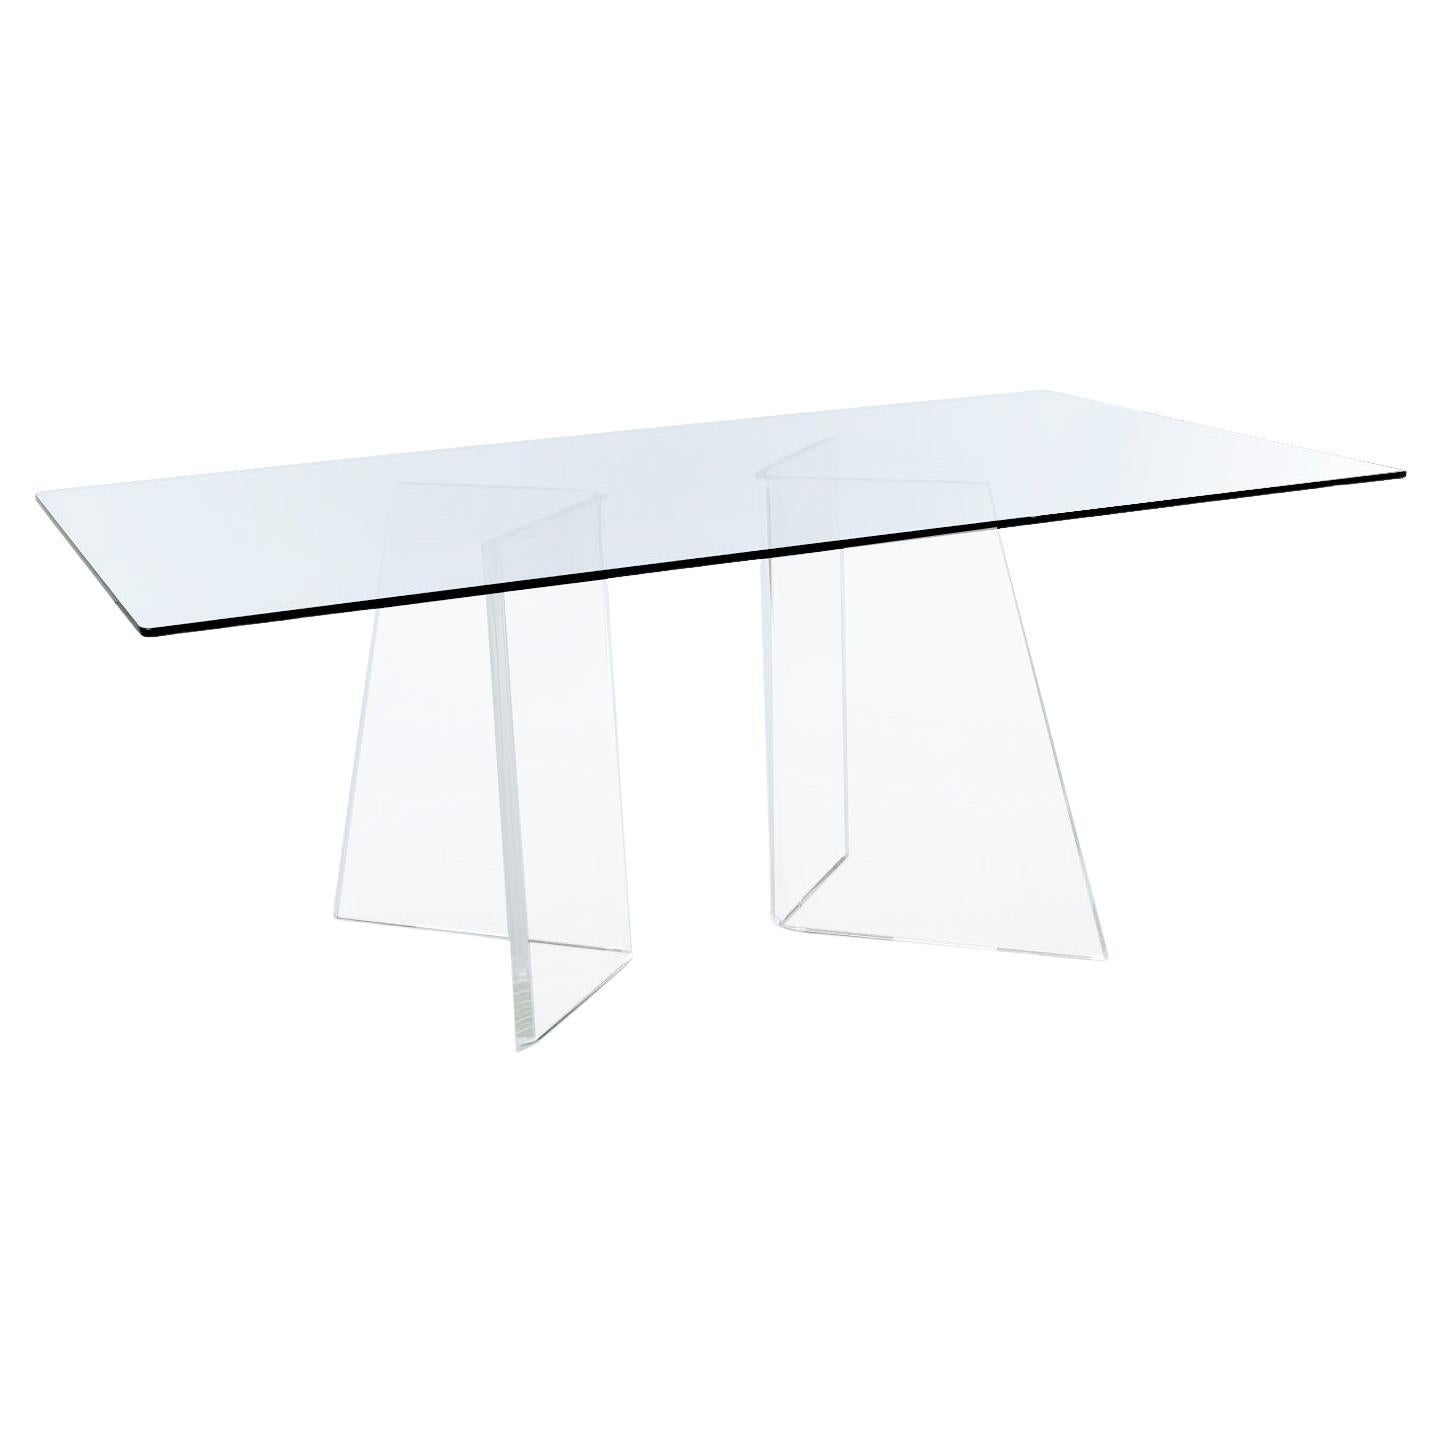 This gorgeous Nineteen-Laties Lucite table is almost ghostly as it the clear glass top and acrylic pedestals seem to vanish in the sight line. The two thick Lucite pedestals are asymmetric wedges resembling a three dimensional scalene triangle. The